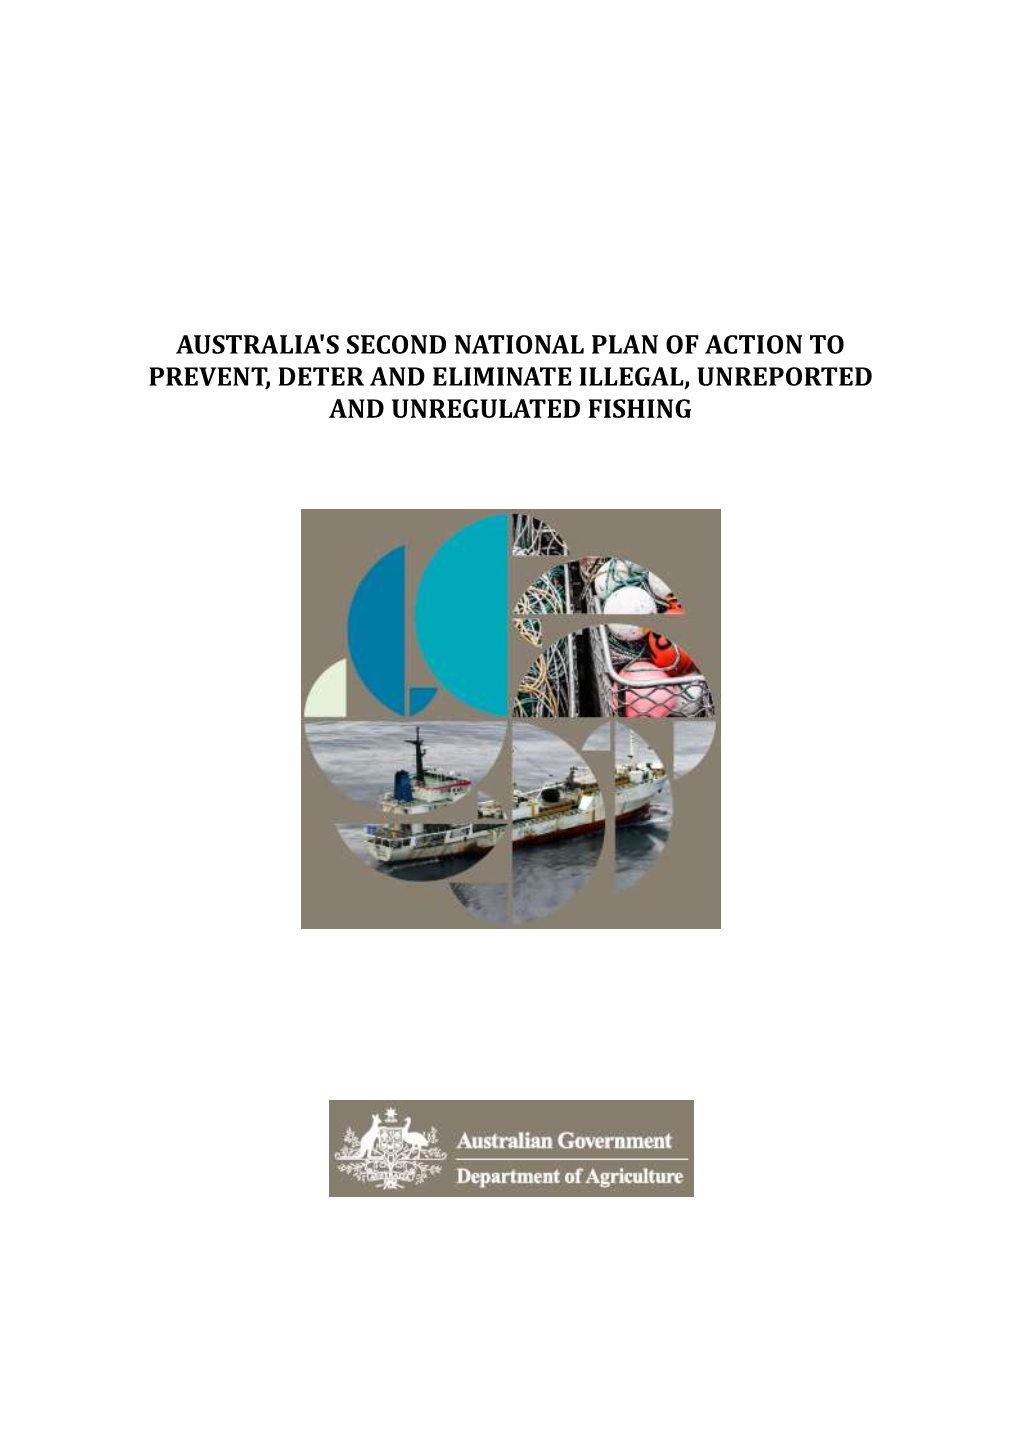 Australia's Second National Plan of Action to Prevent, Deter and Eliminate Illegal, Unreported and Unregulated Fishing